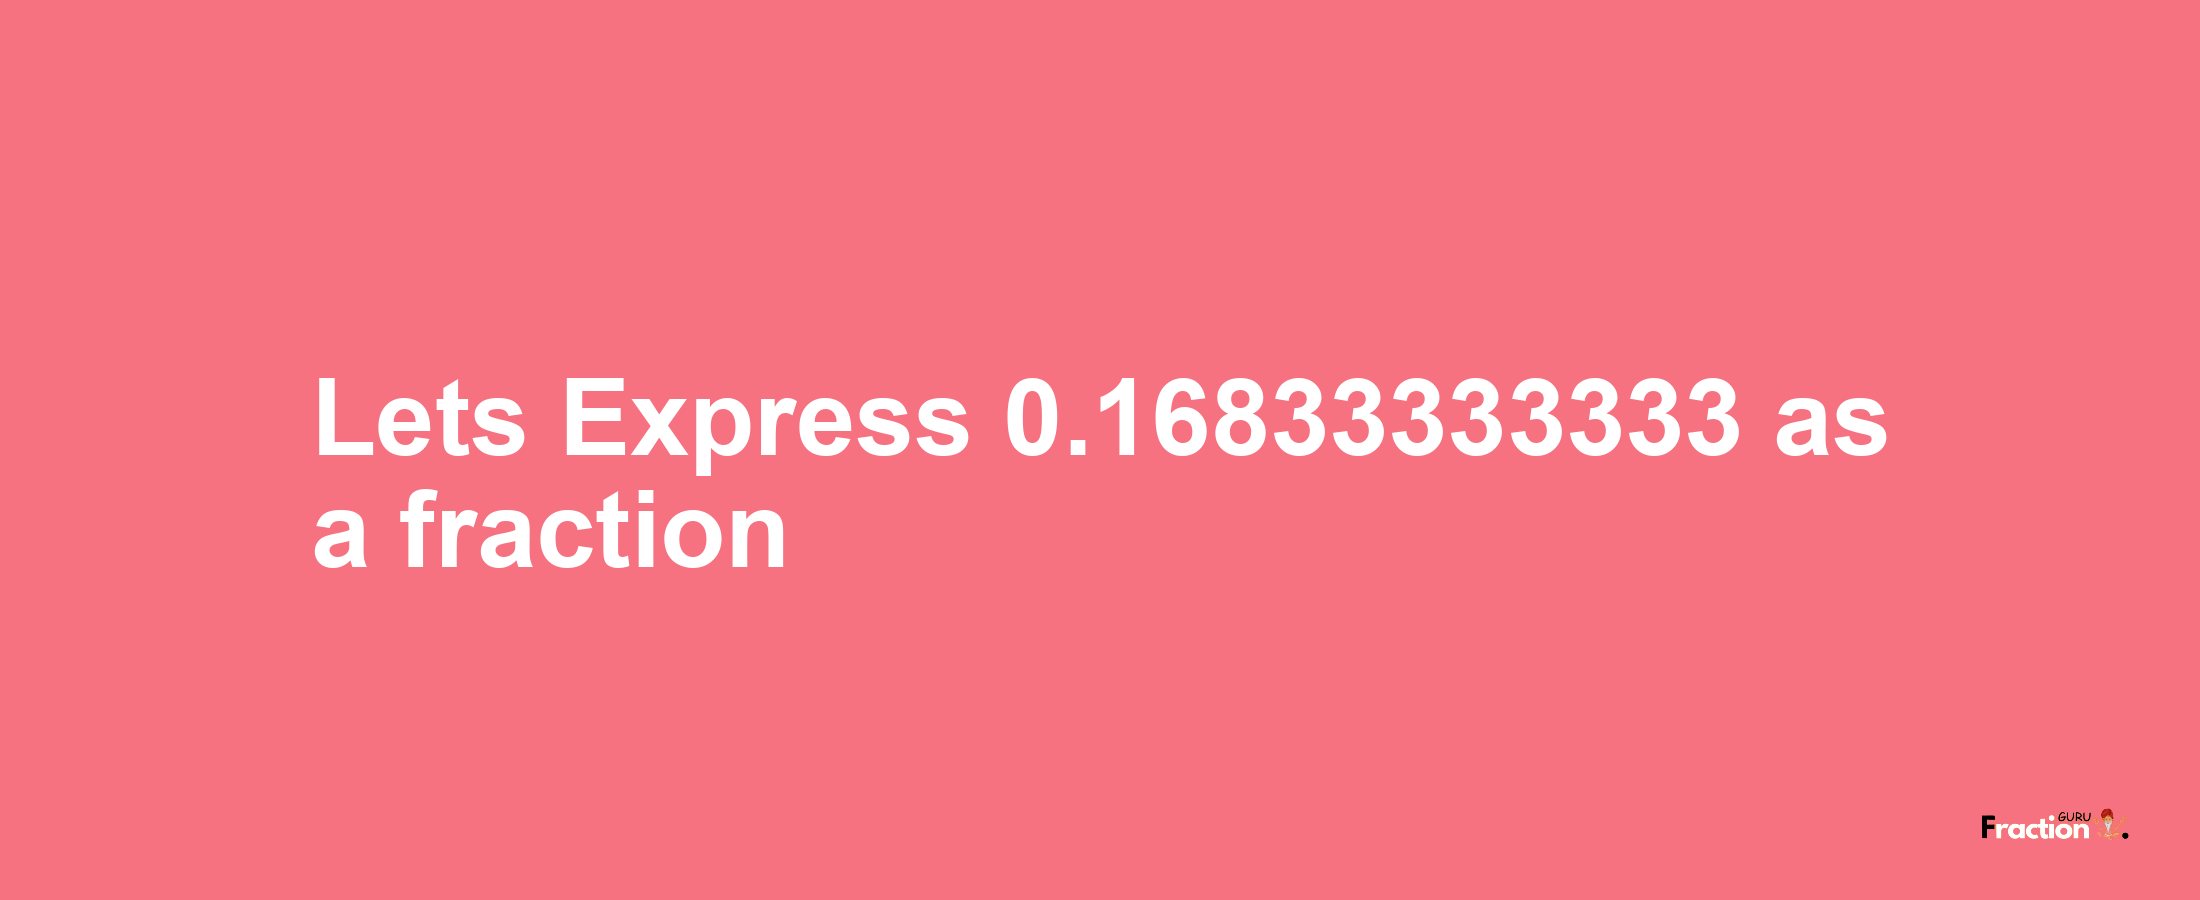 Lets Express 0.16833333333 as afraction